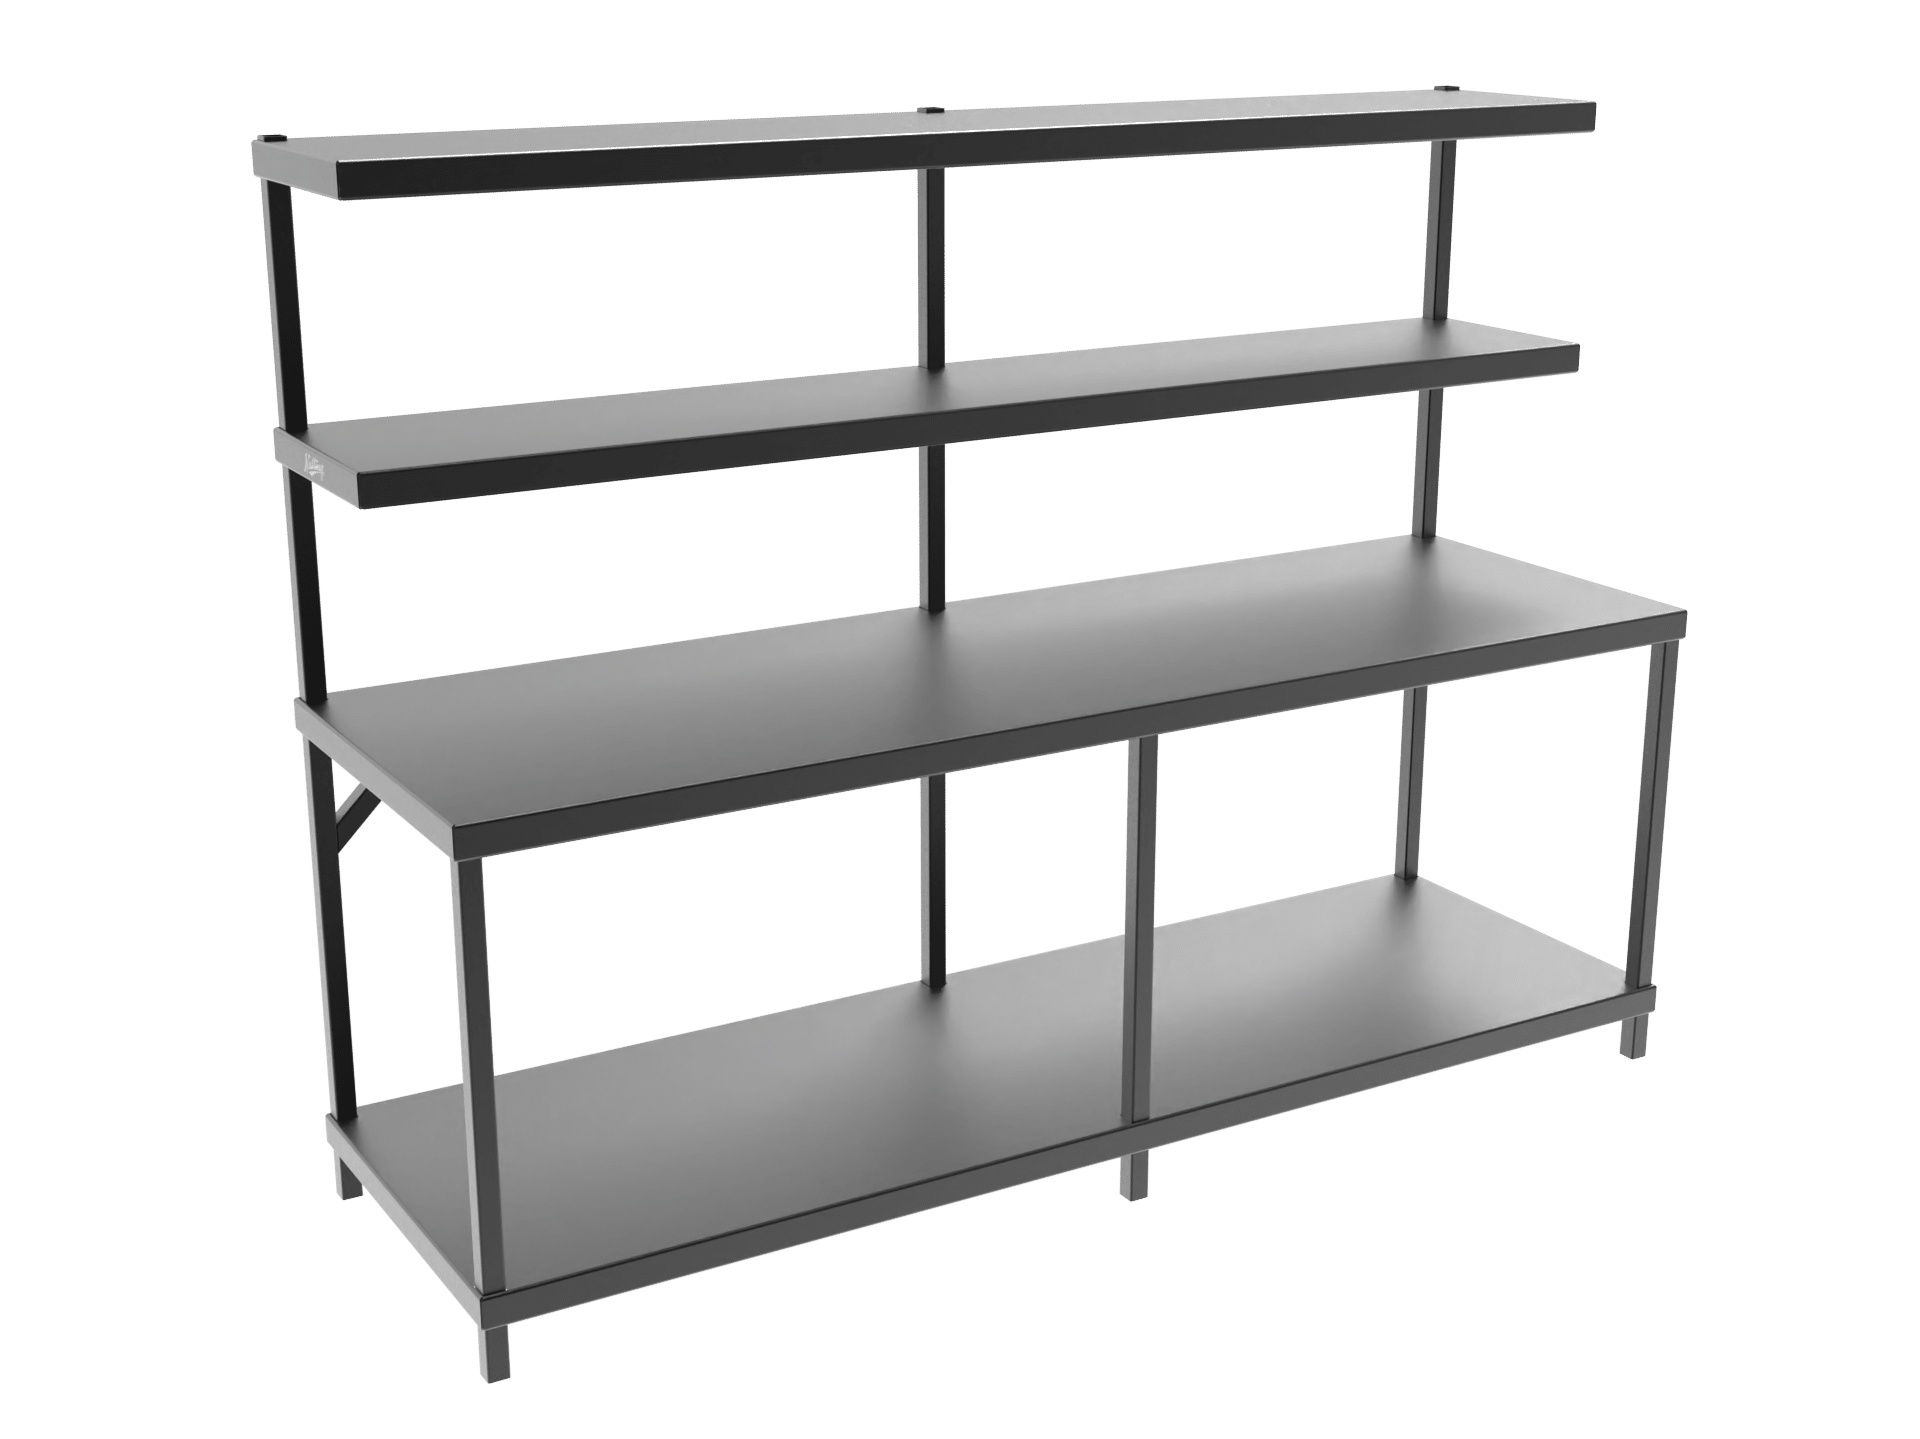 Choosing the Perfect Workbench or Packing Table